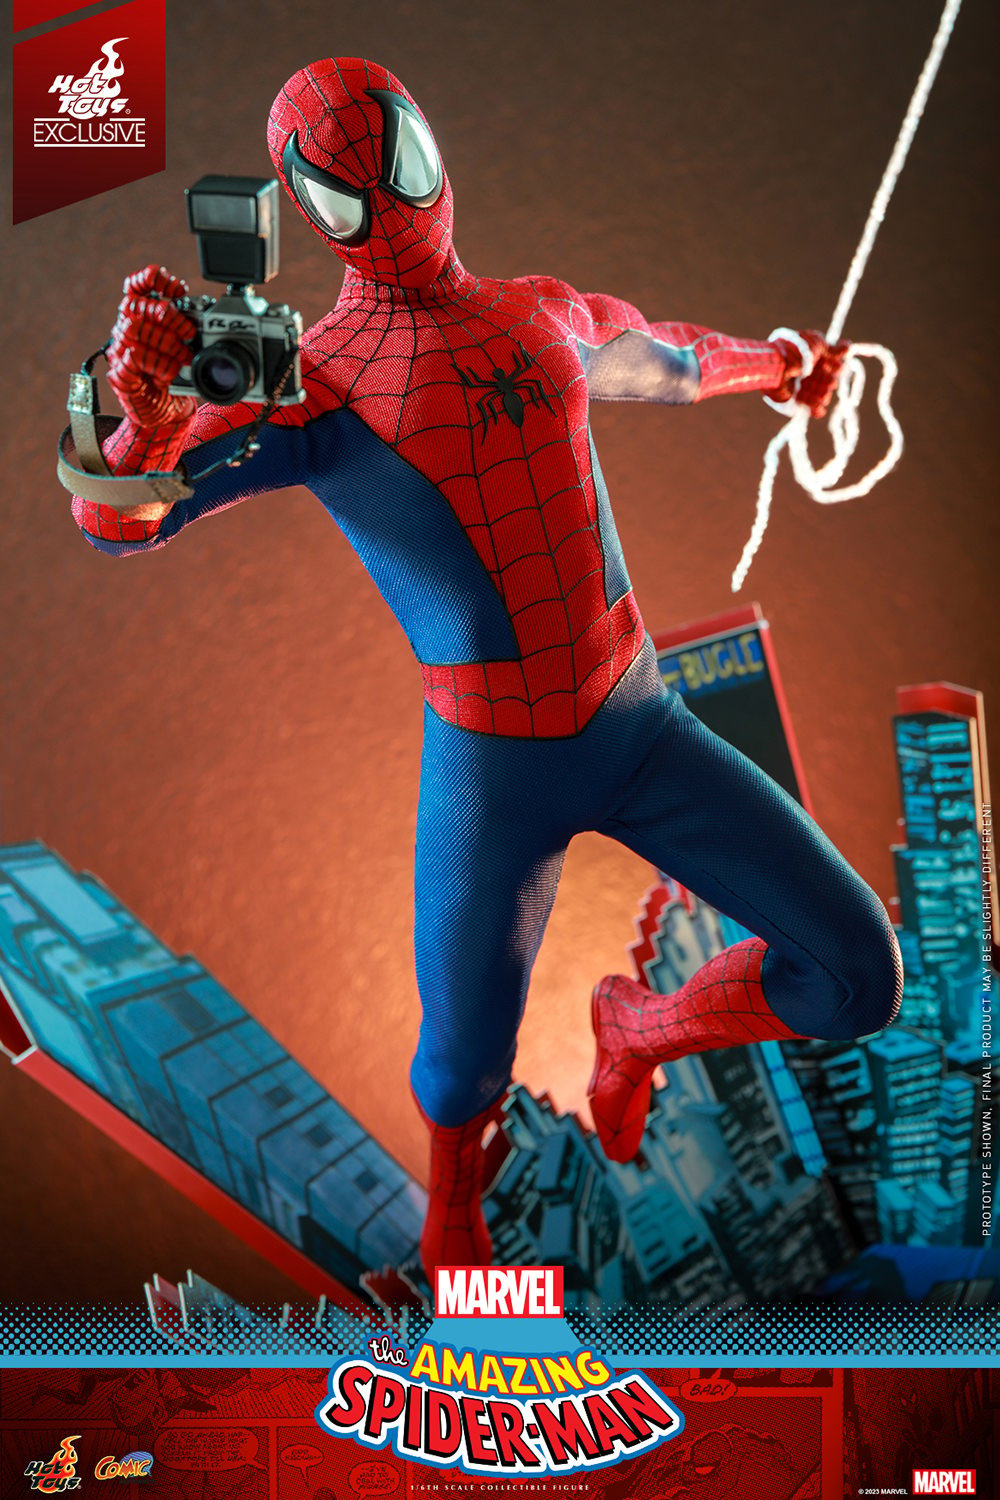 Spider-Man Sixth Scale Figure by Hot Toys